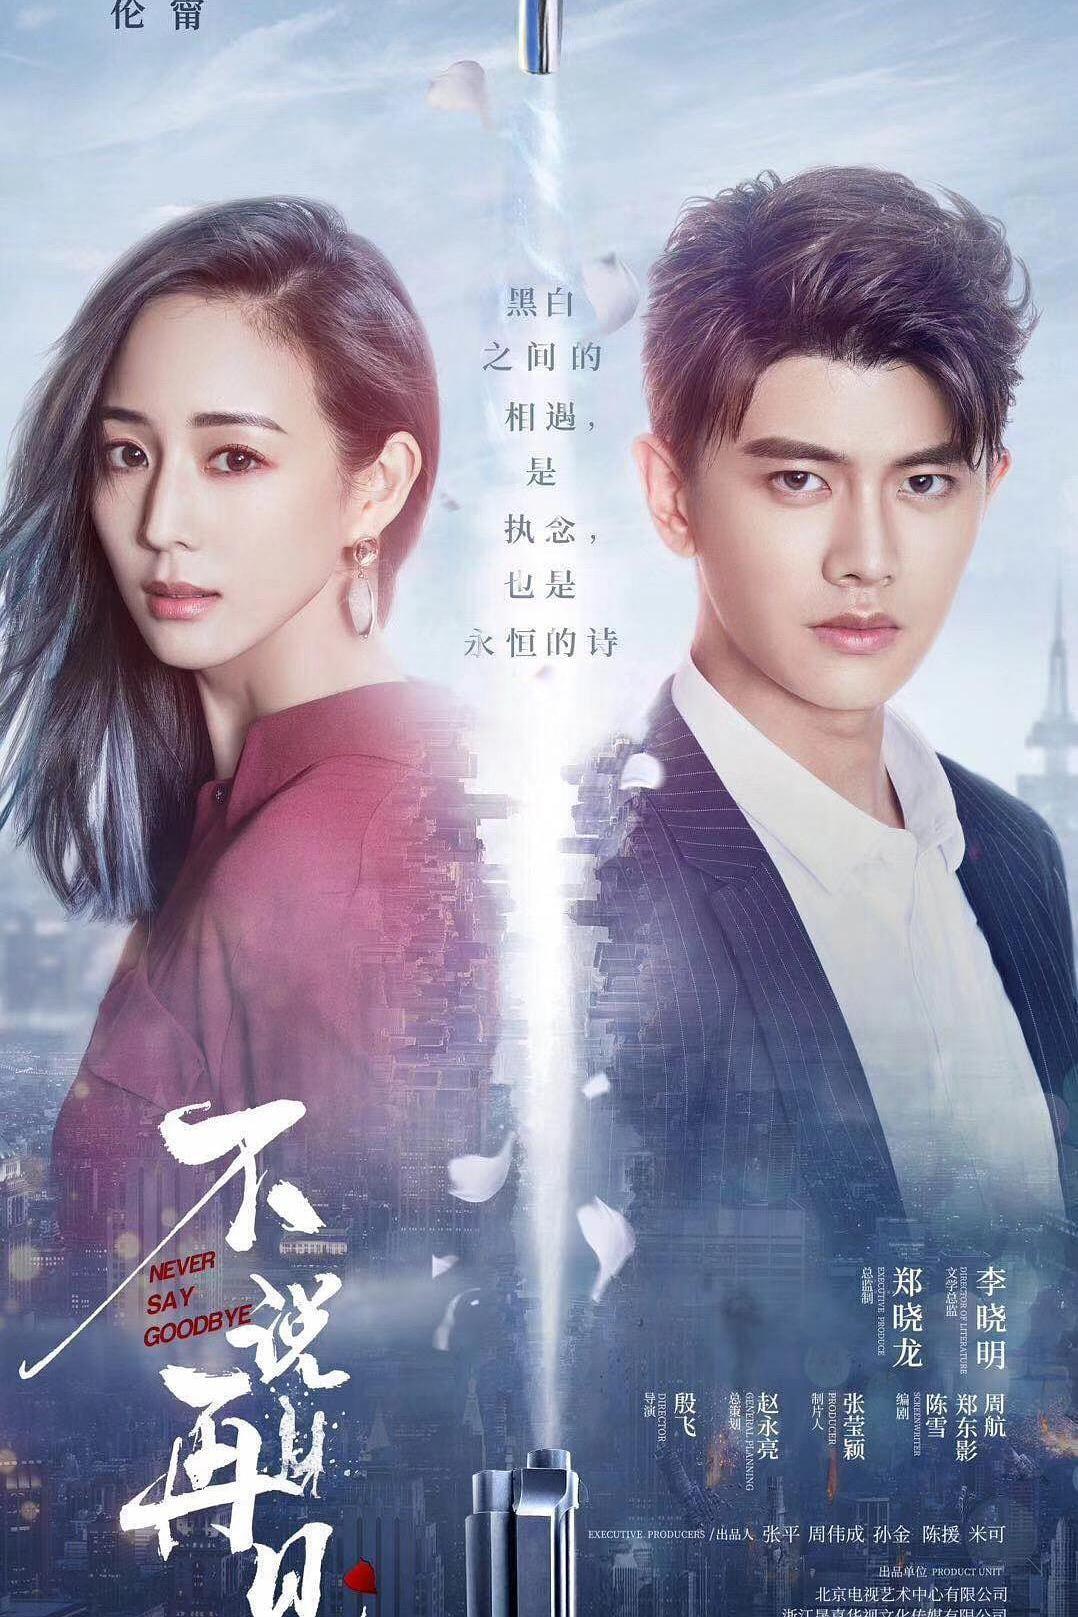 TV ratings for Never Say Goodbye (不说再见) in Spain. iqiyi TV series